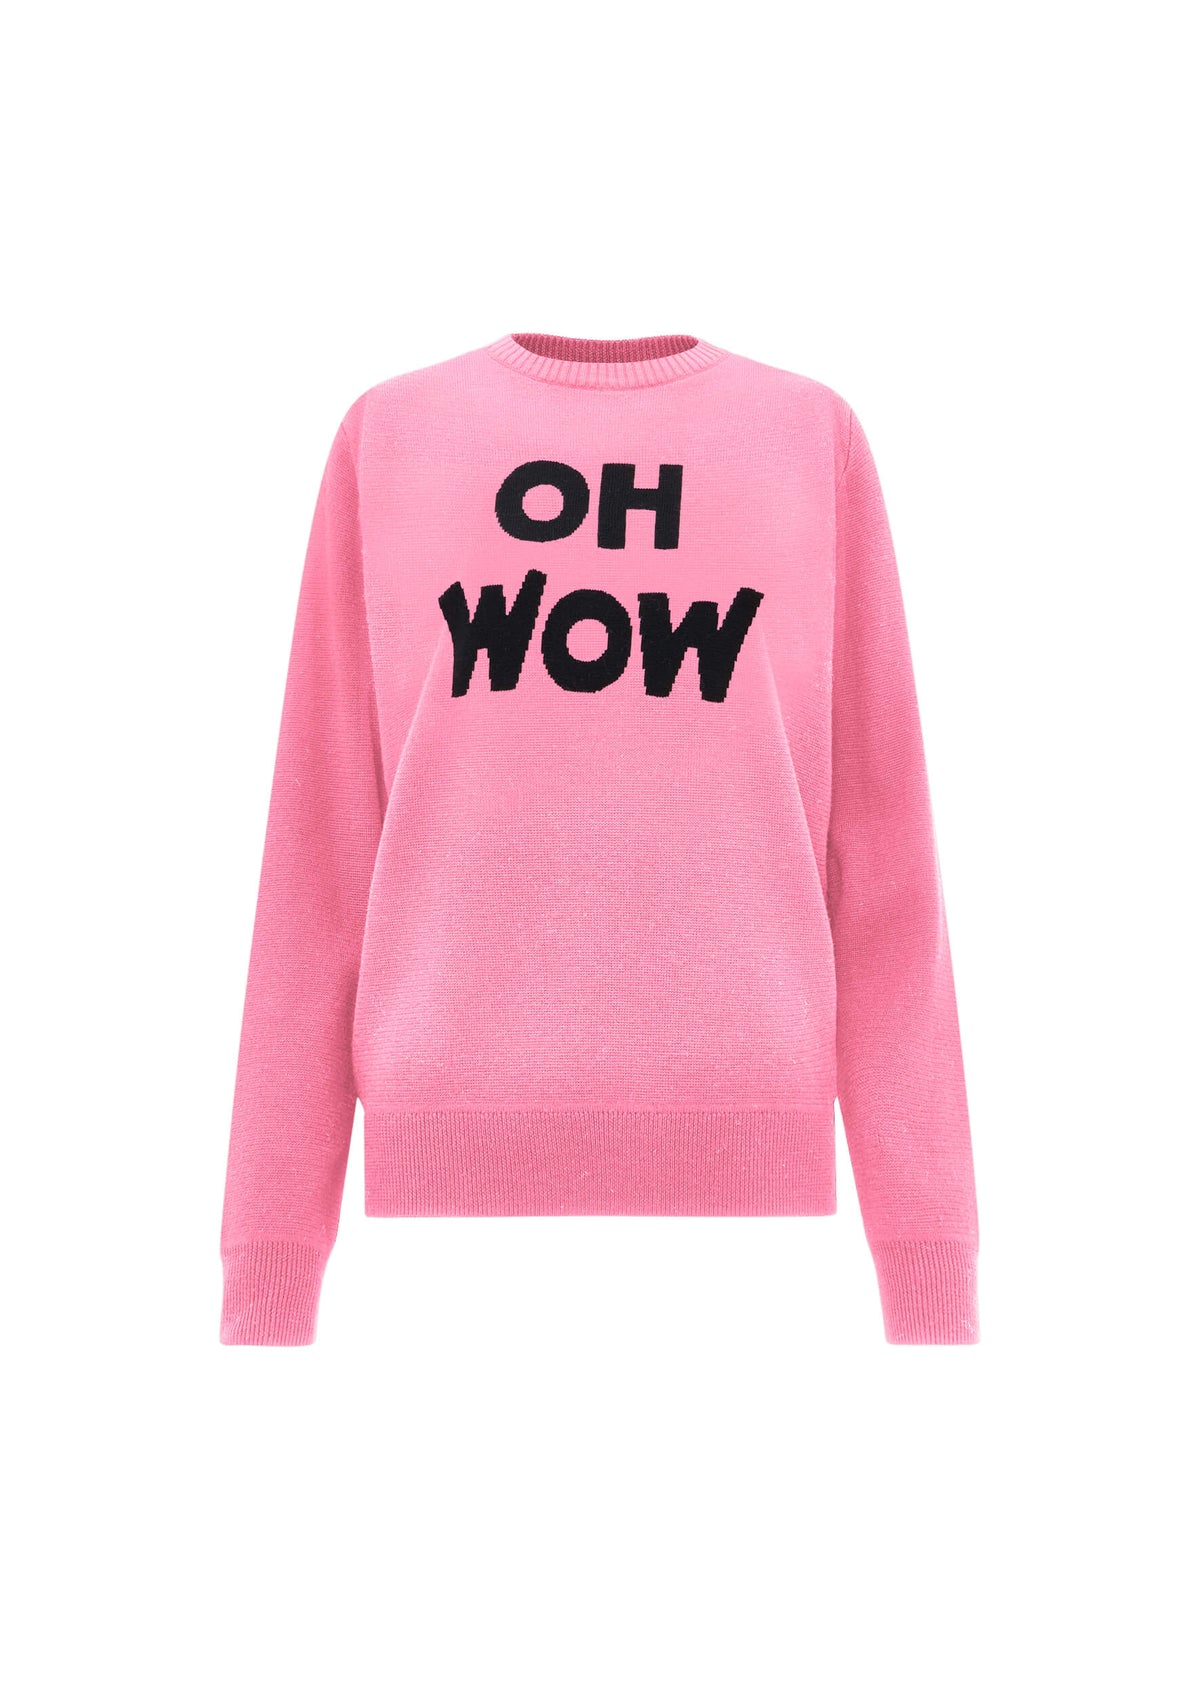 BF Oh Wow jumper in pink